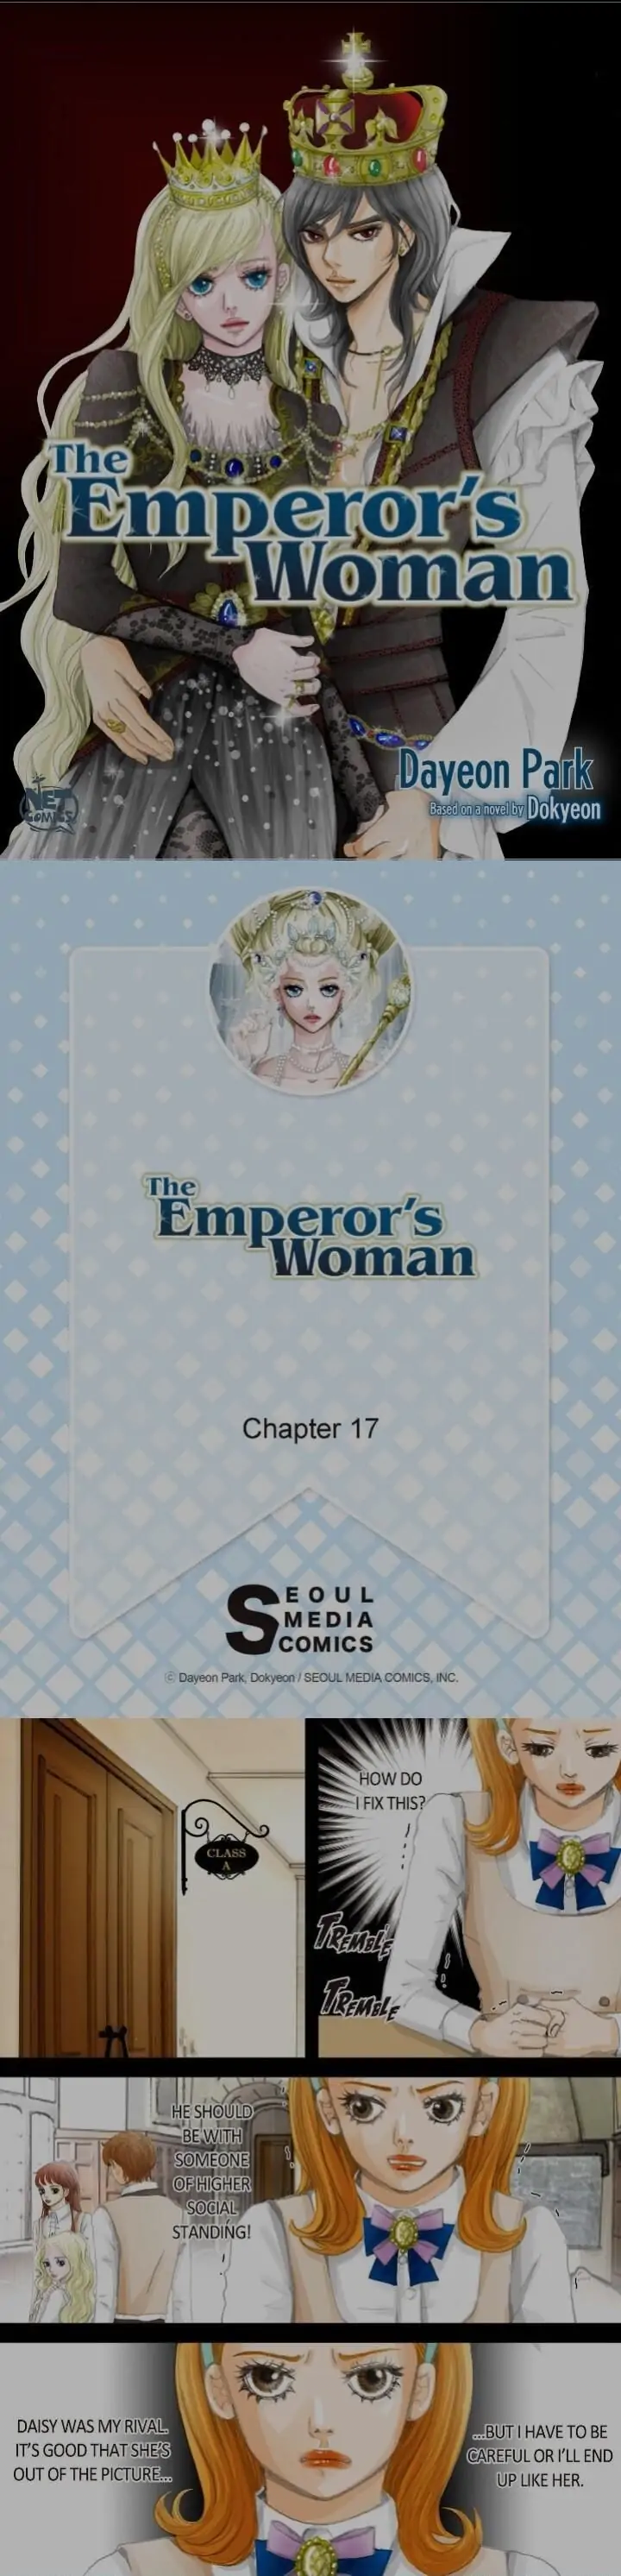 The Emperor’s Woman chapter 17